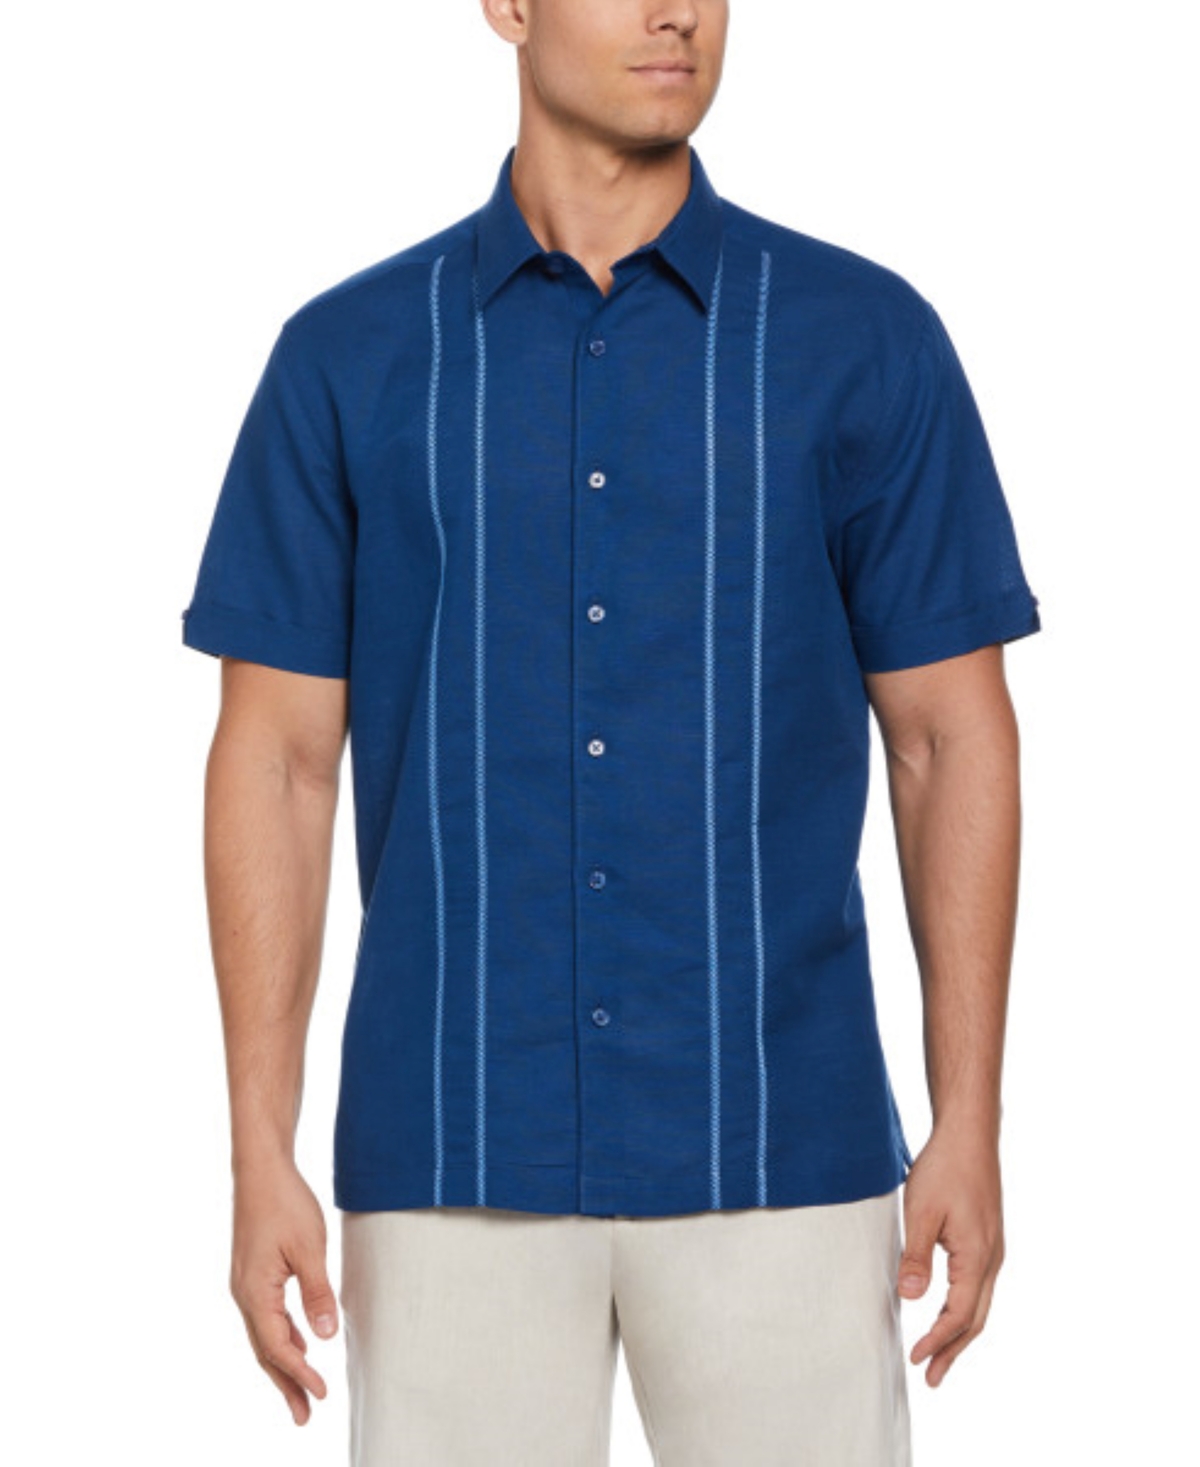 Men's Big & Tall Embroidered Panel Button-Down Shirt - Blueberry